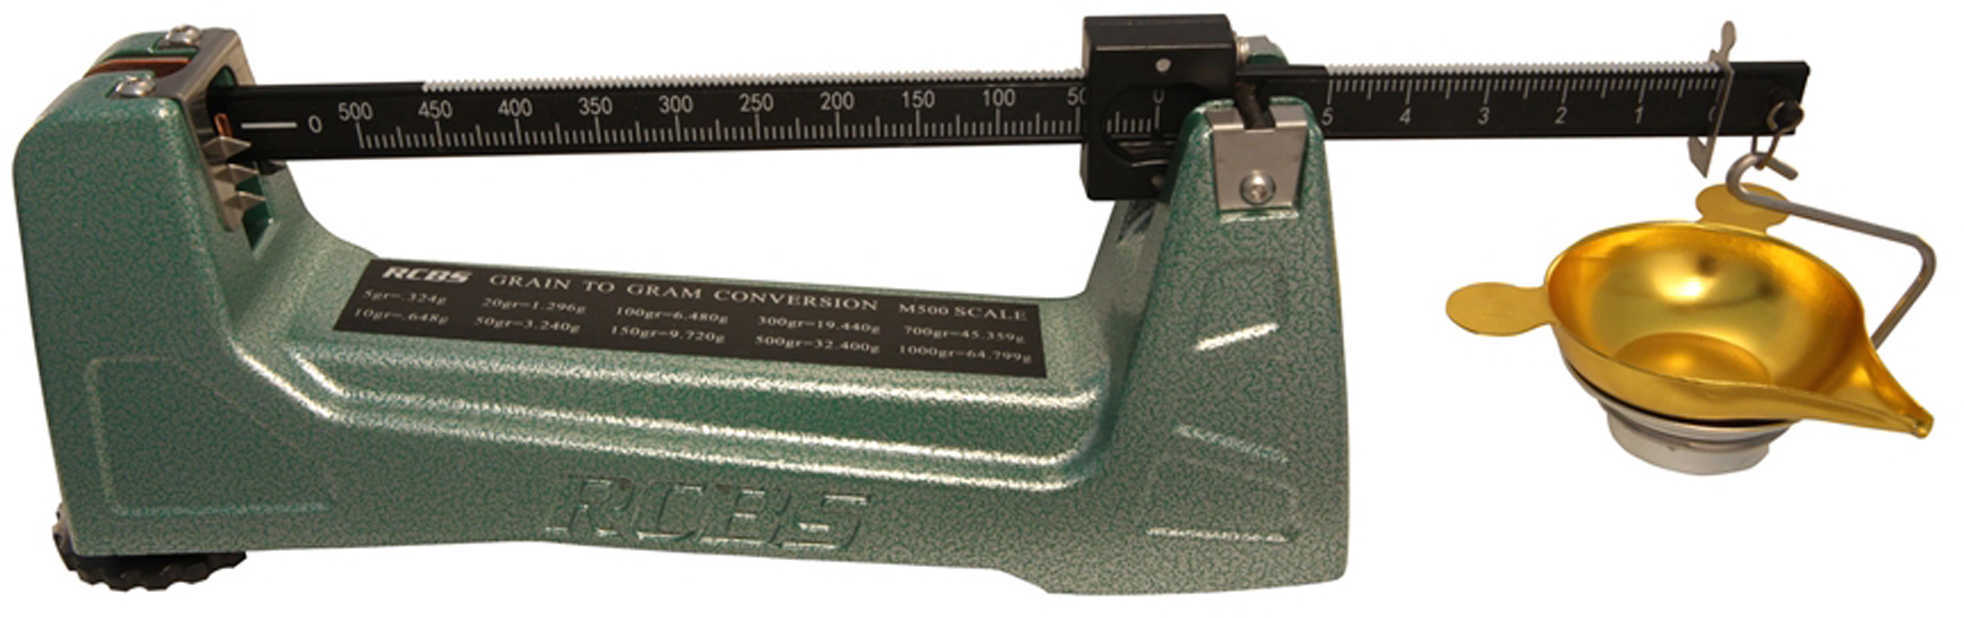 RCBS Model M500 Reloading Scale